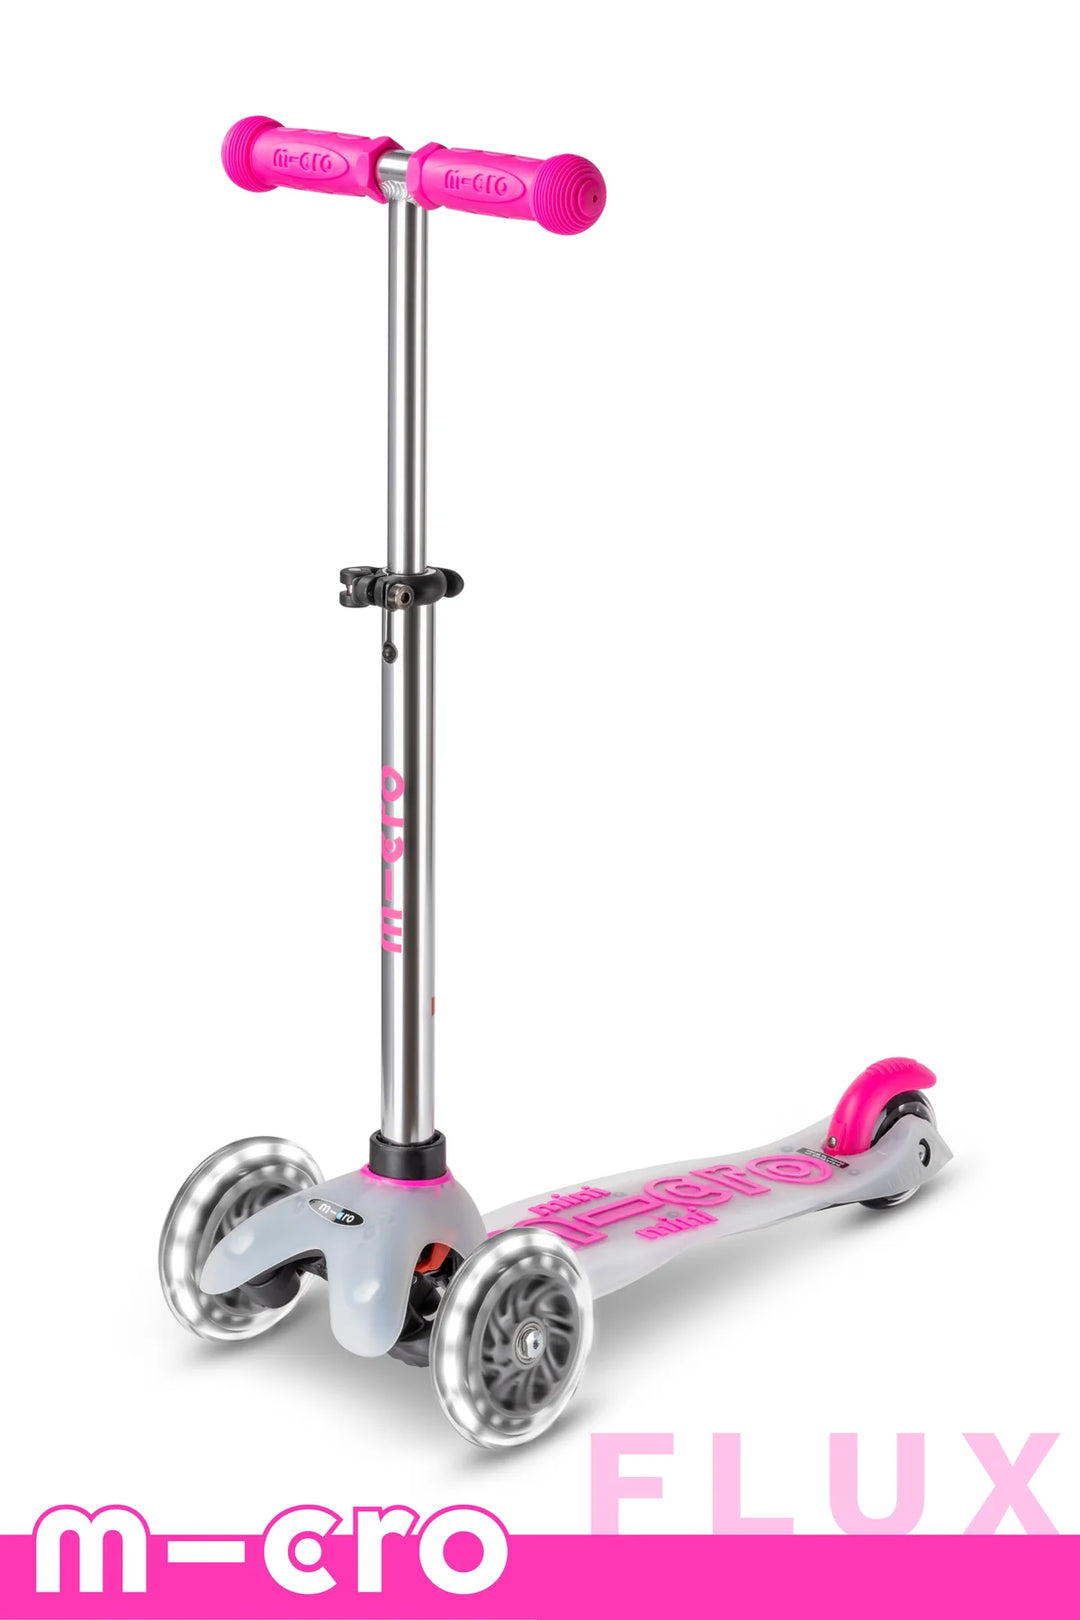 >Micro Kids Mini Led Scooter Ages 2-5 [more colors]